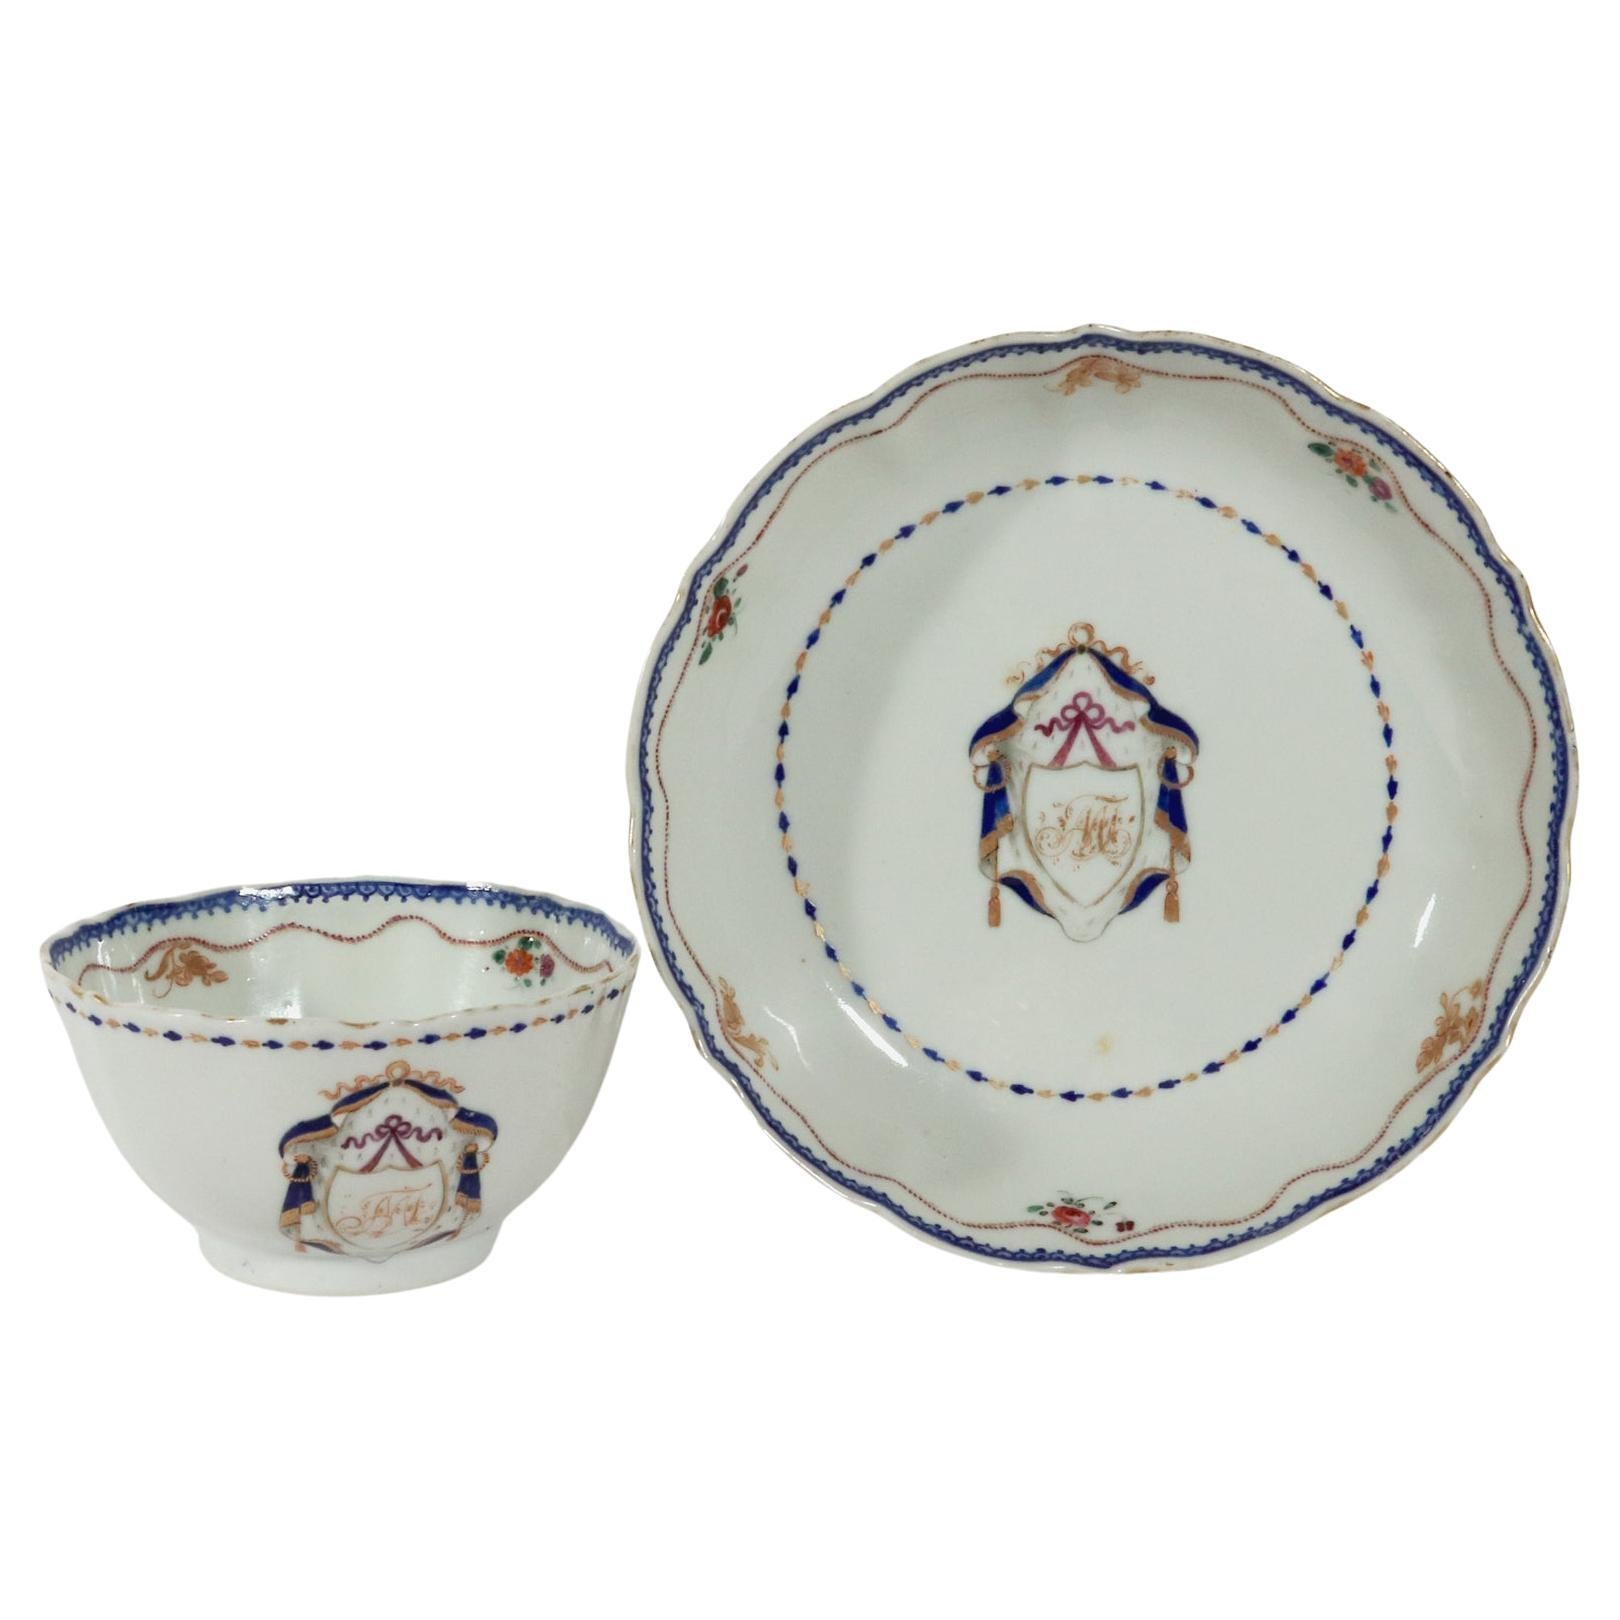 Chinese Export Porcelain Armorial Tea Bowl & Saucer with Initials MJ For Sale